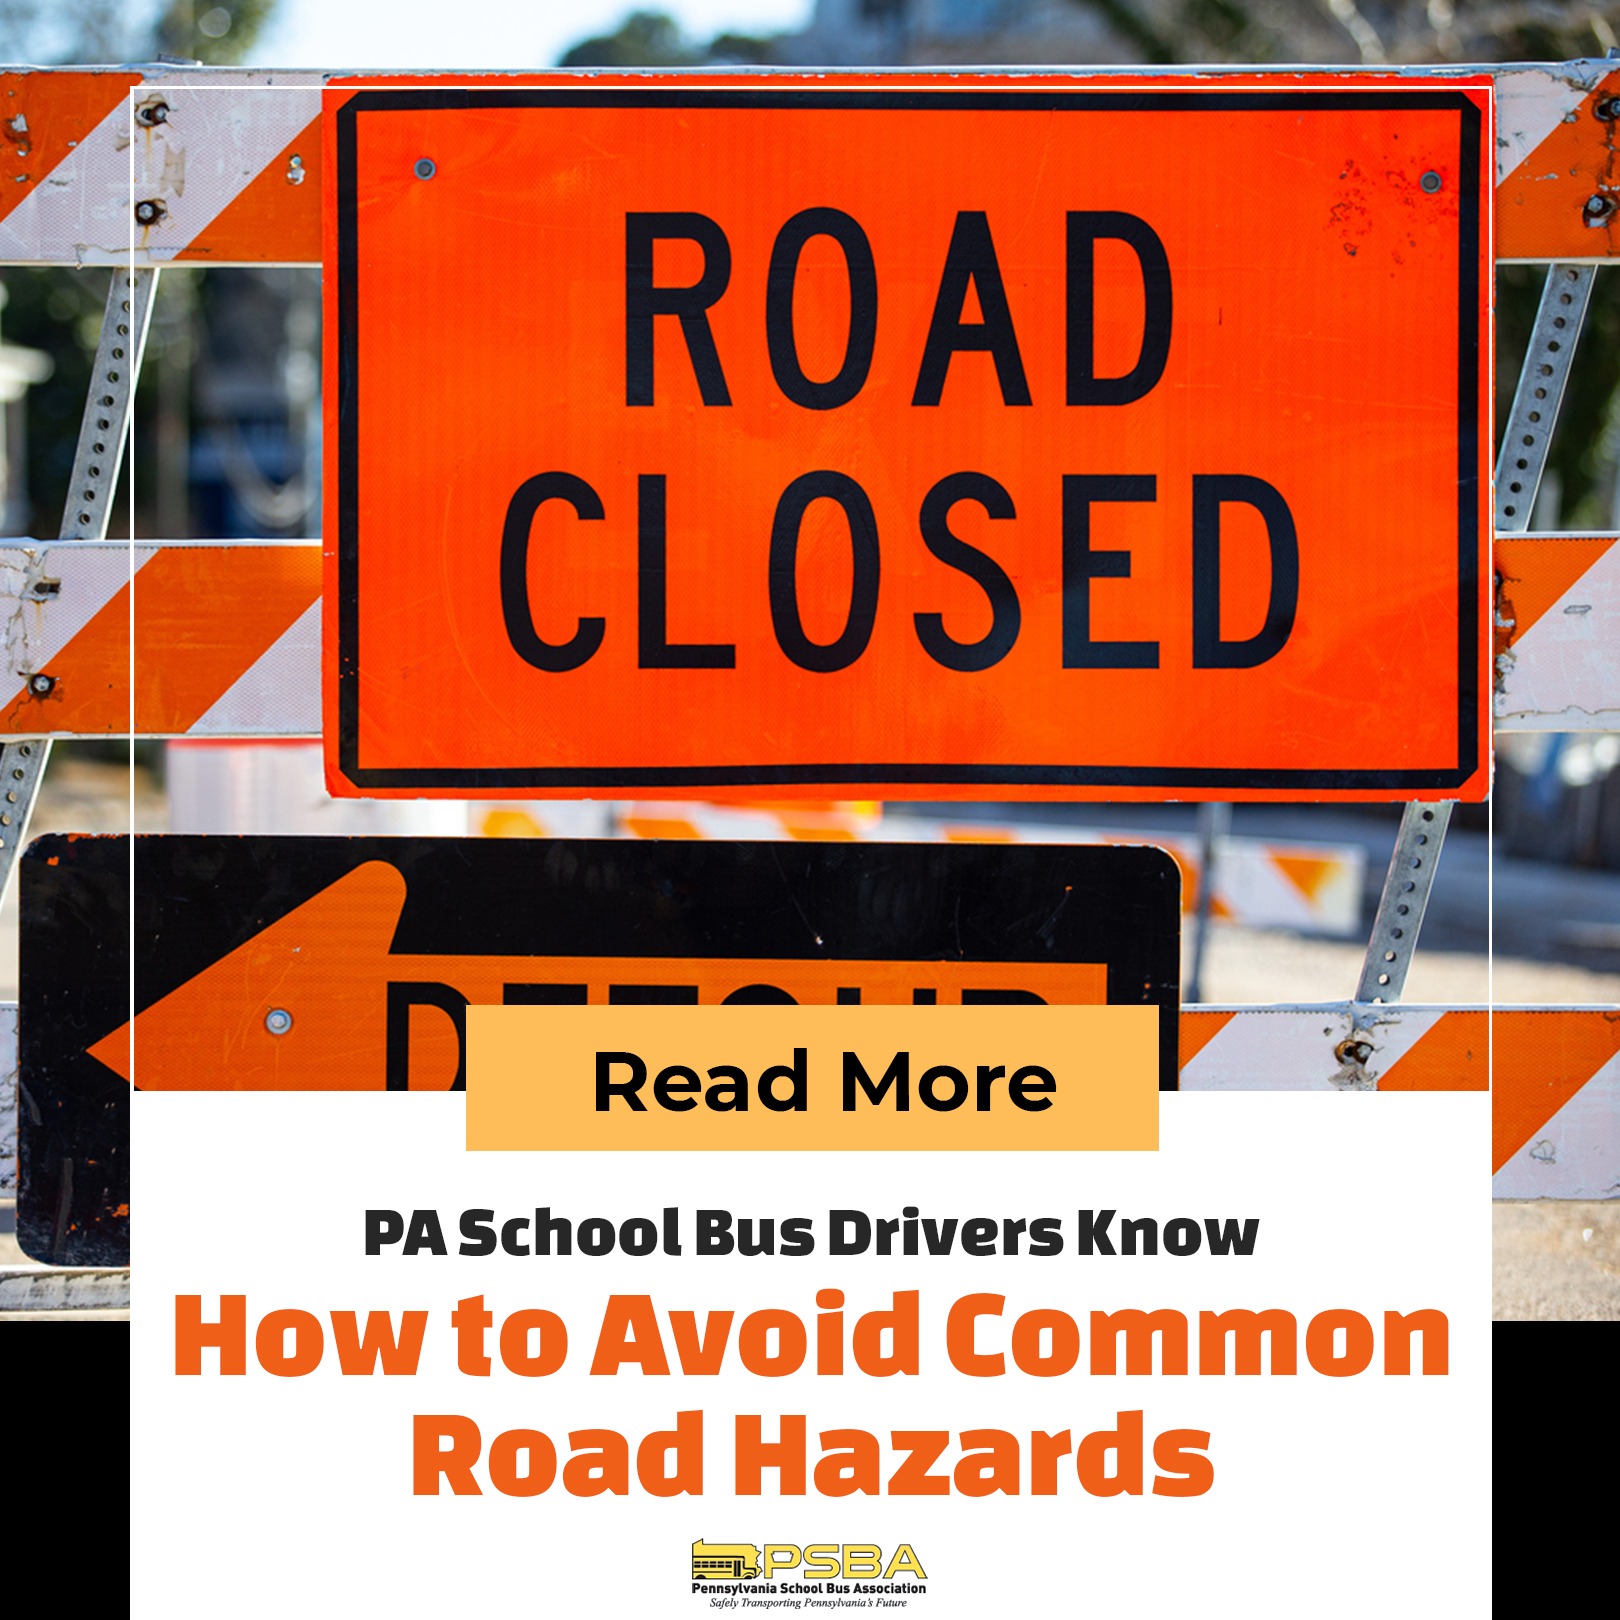 PA School Bus Drivers Know How to Avoid Common Road Hazards